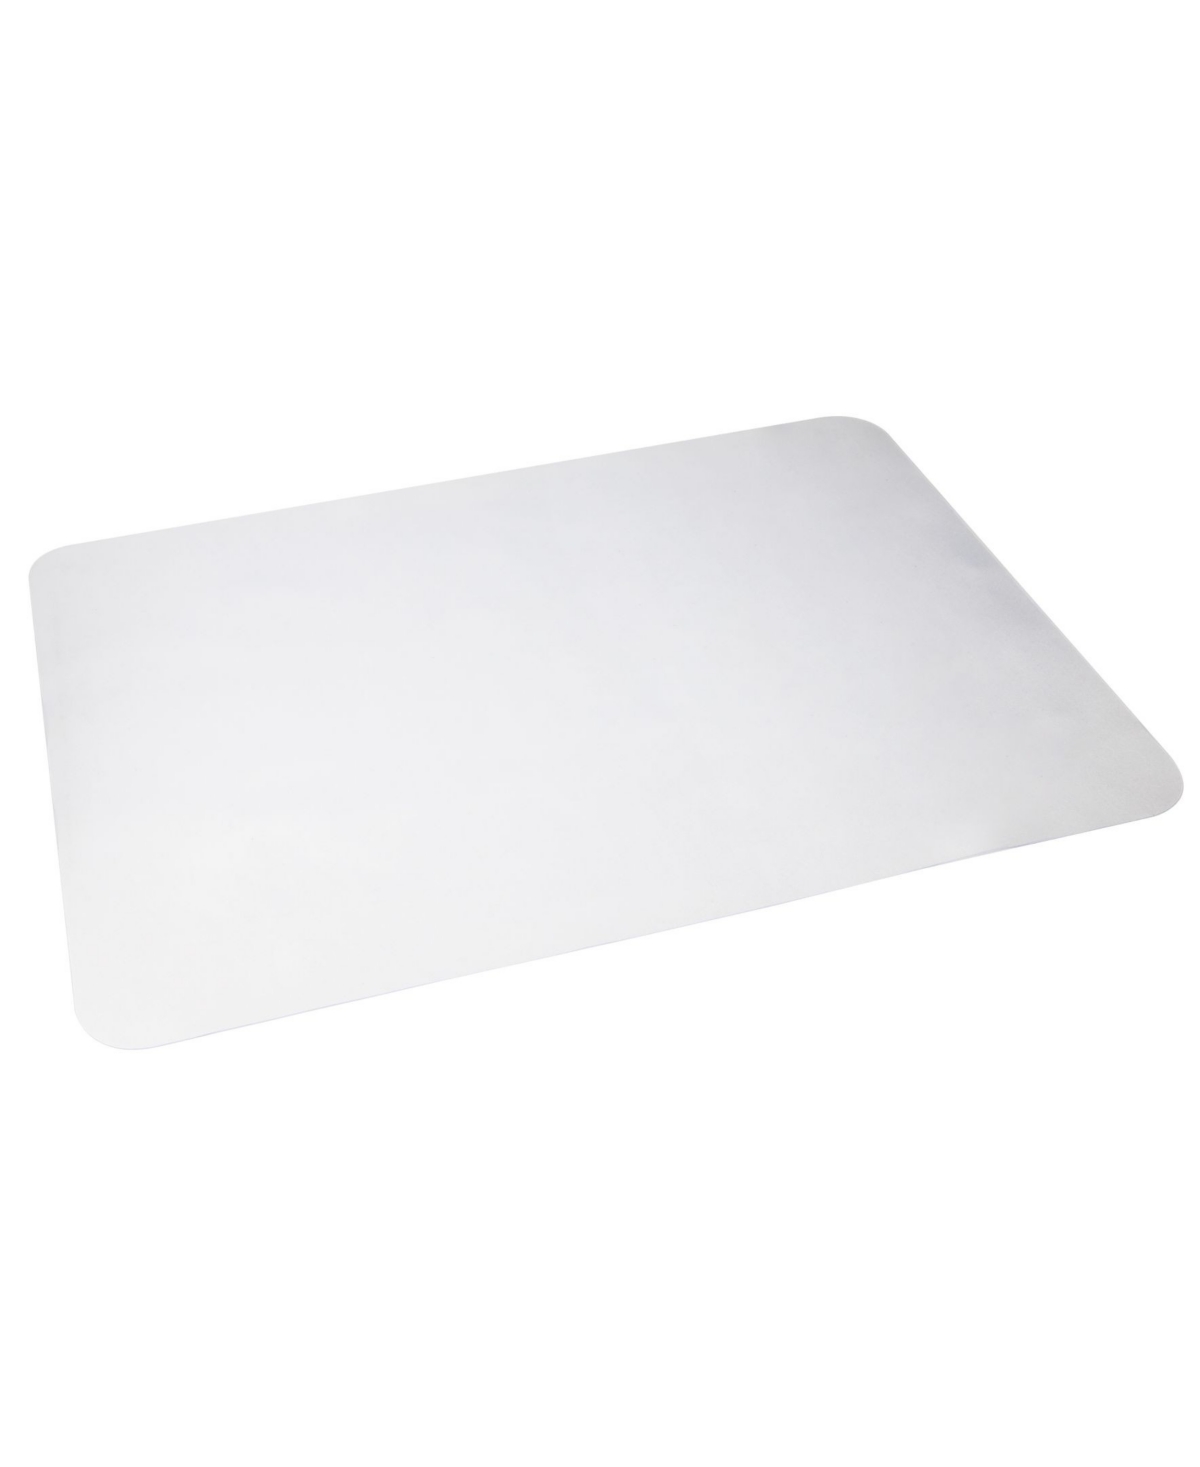 Floor Protection Mat, Office Pad for Rolling Chairs, Rectangular Shape, Designed for Hard Surfaces Only - Clear